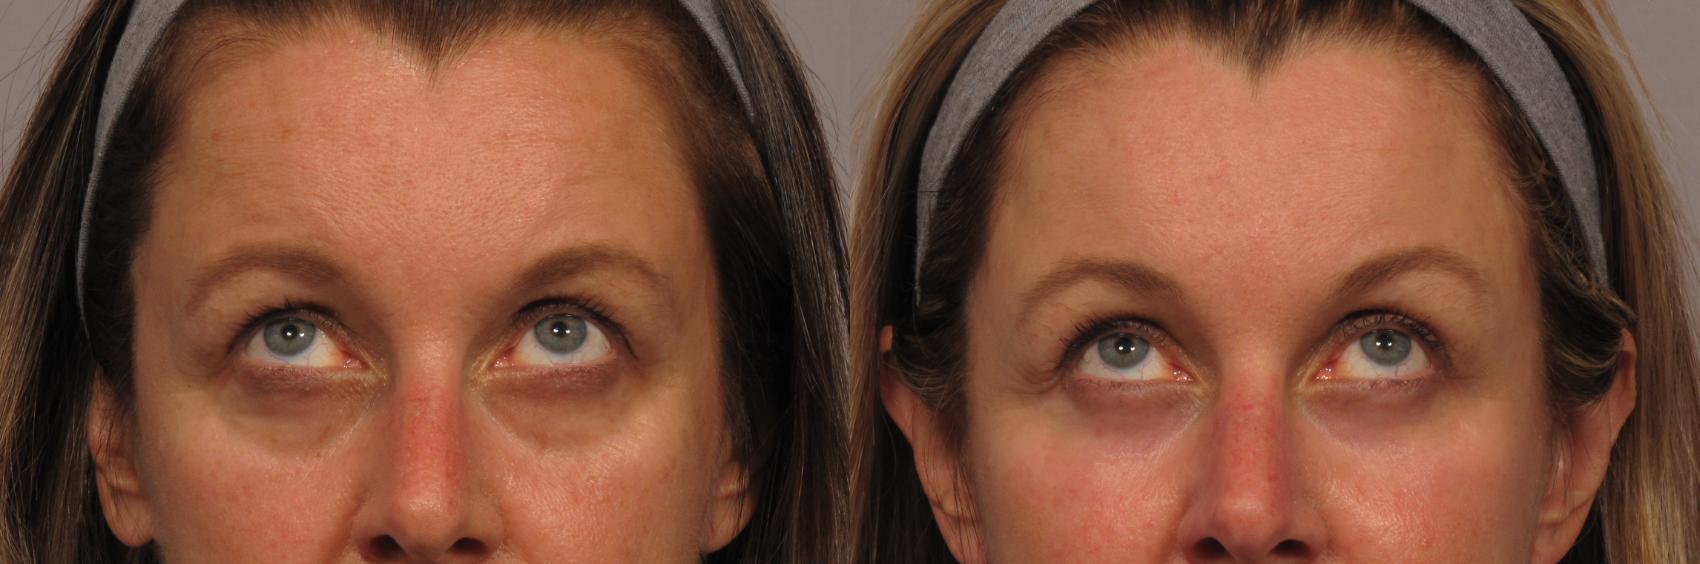 Eyelid and Brow Lift Before and After, Front View Looking up